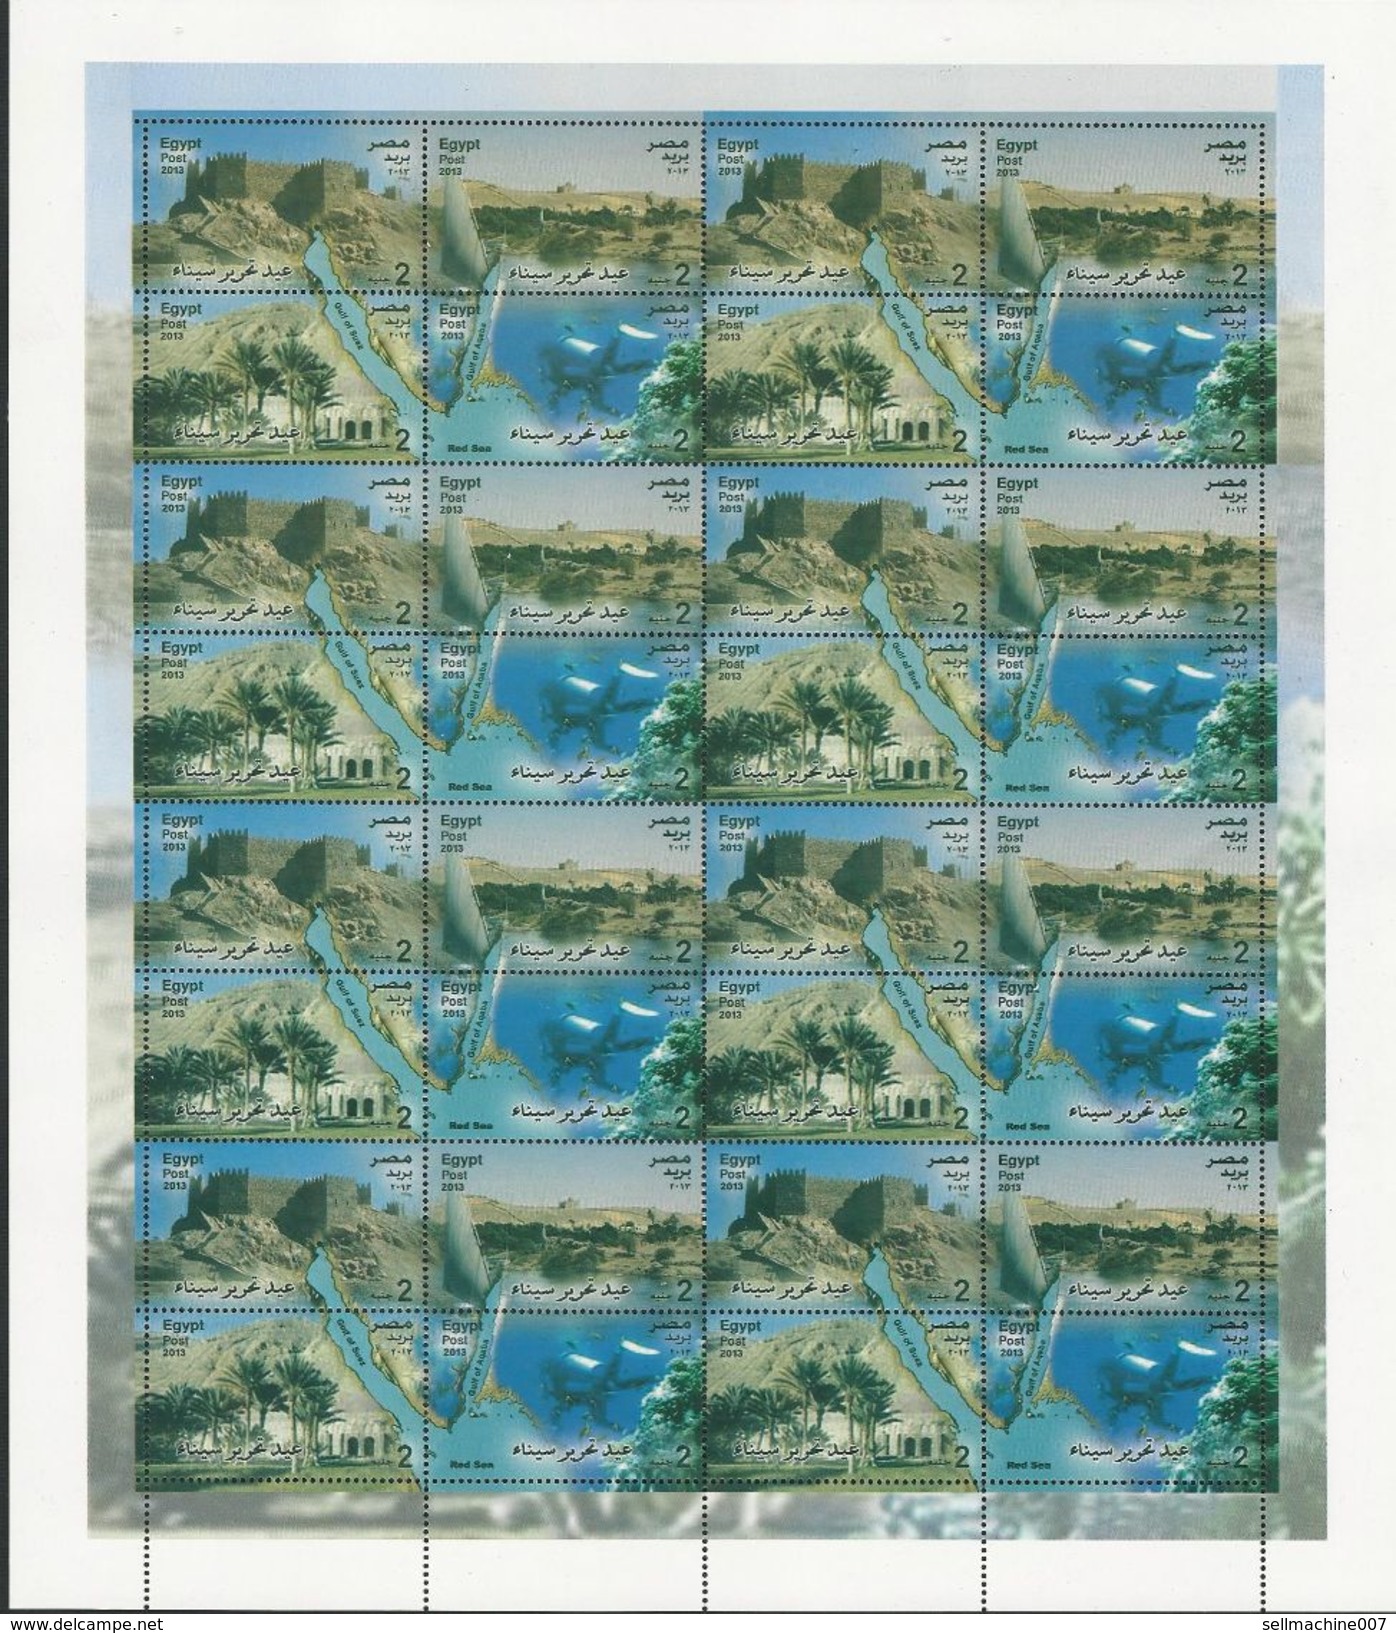 EGYPT 2013 Full Sheet Sinai Liberation Day 32 Stamps 8 Sets X 4 Stamp MNH X 2 POUND - Nile Monuments Divers Palm Trees - Ungebraucht